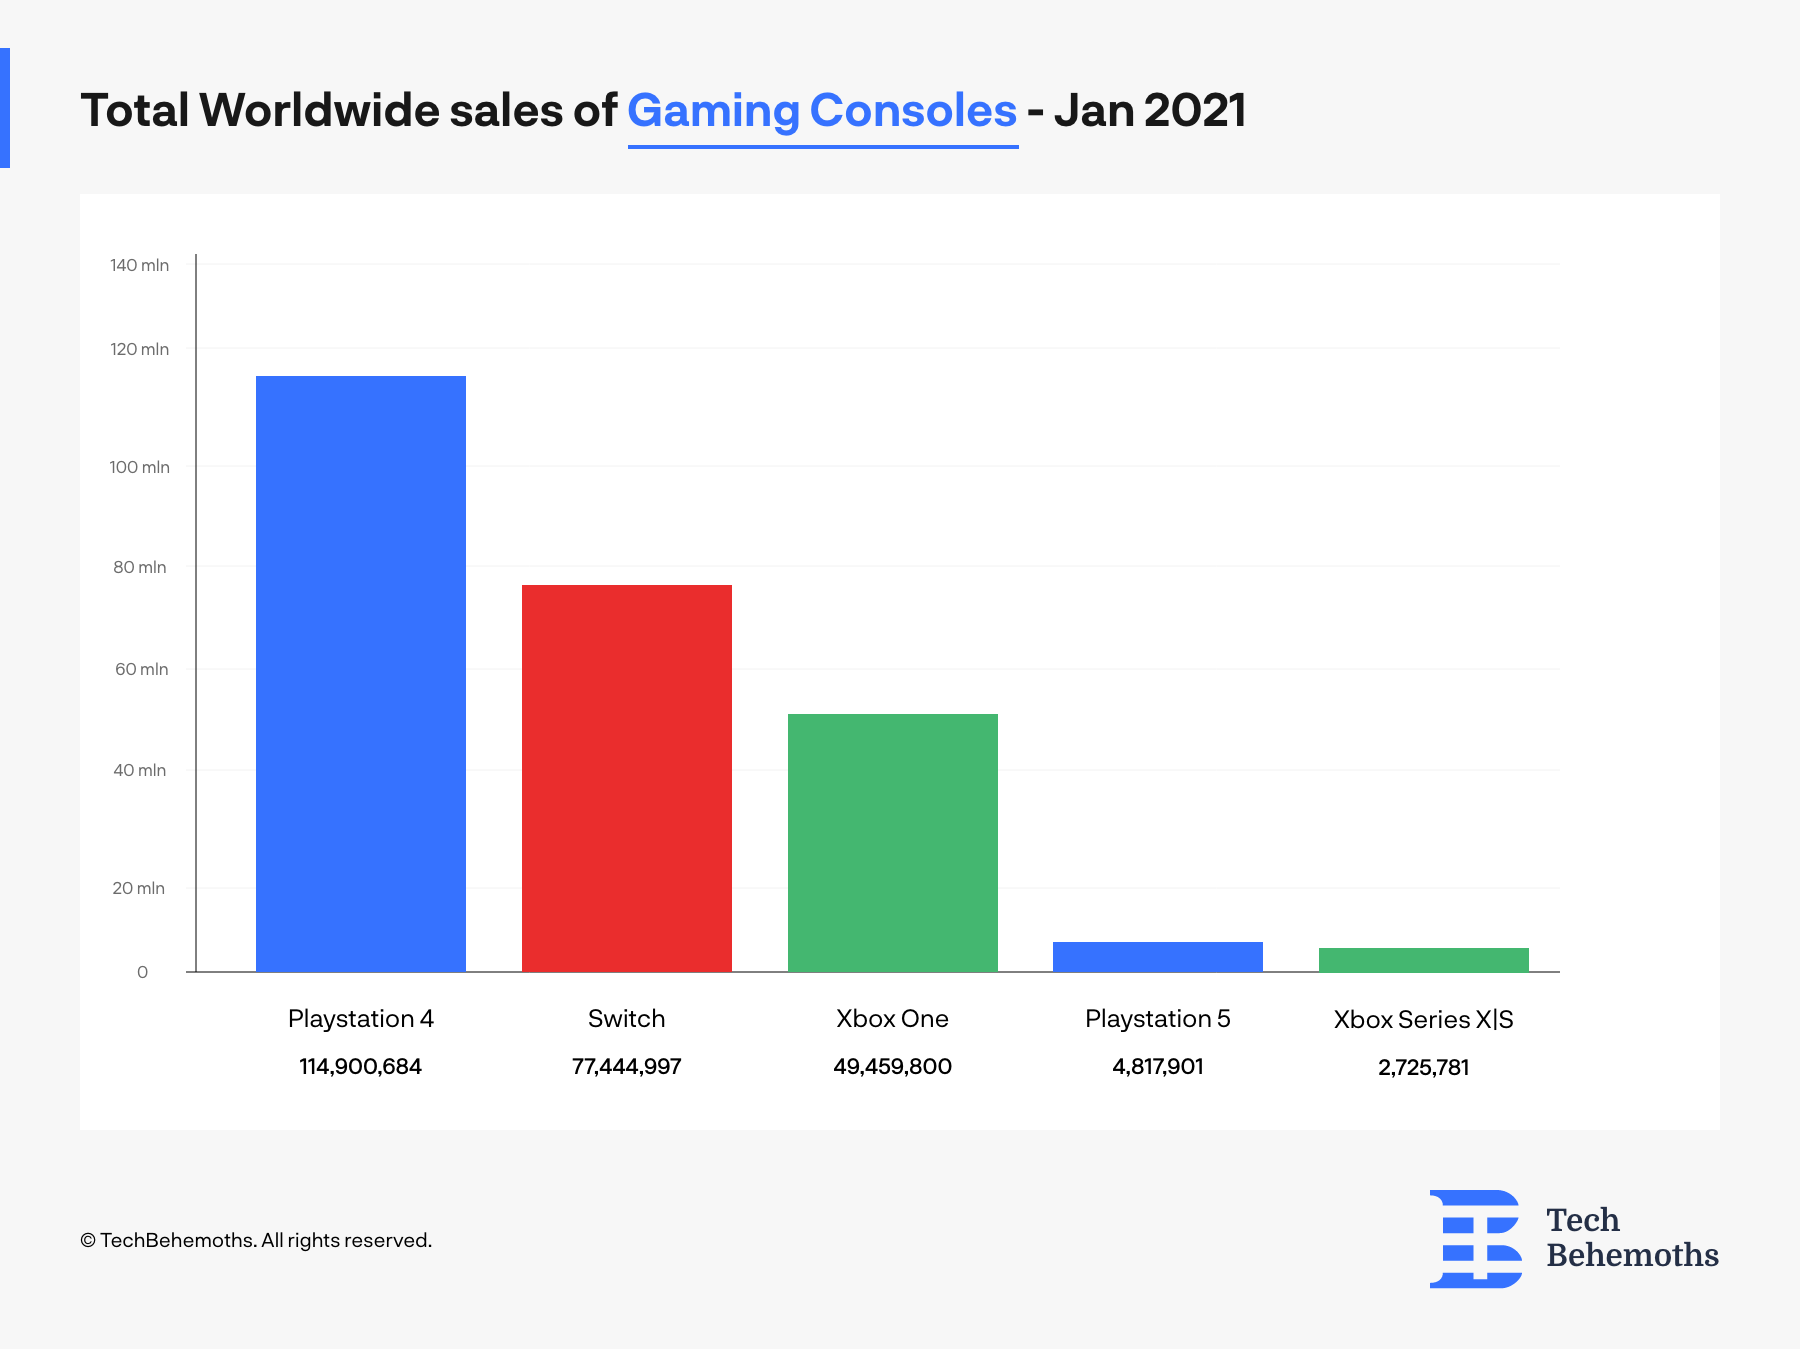 Total worldwide sales of gaming consoles as of January 2021